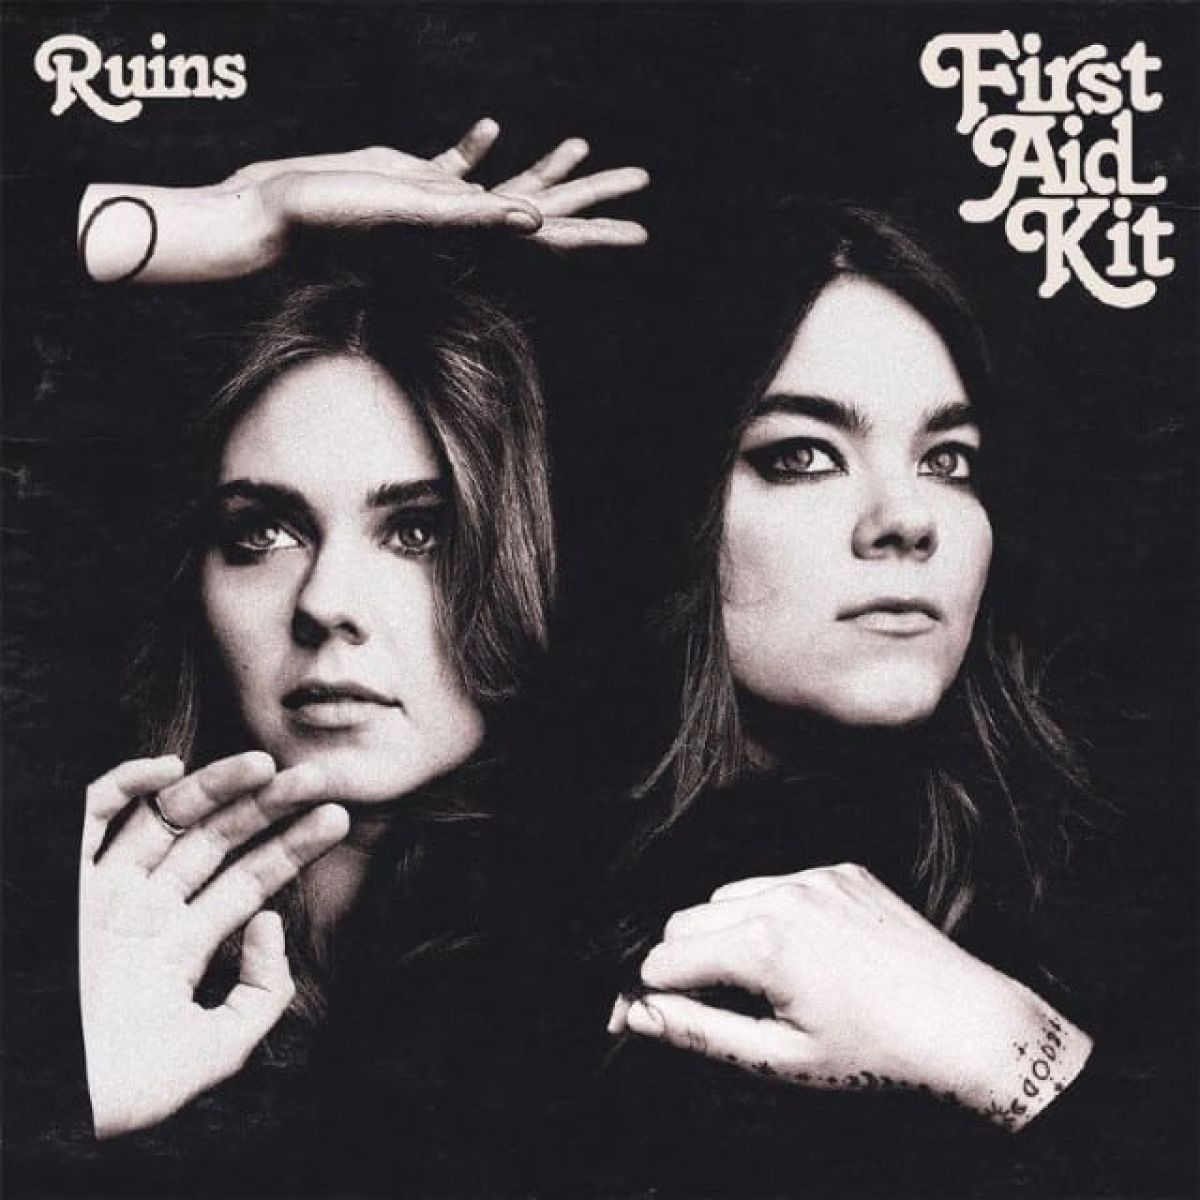 Album review: First Aid Kit – Ruins